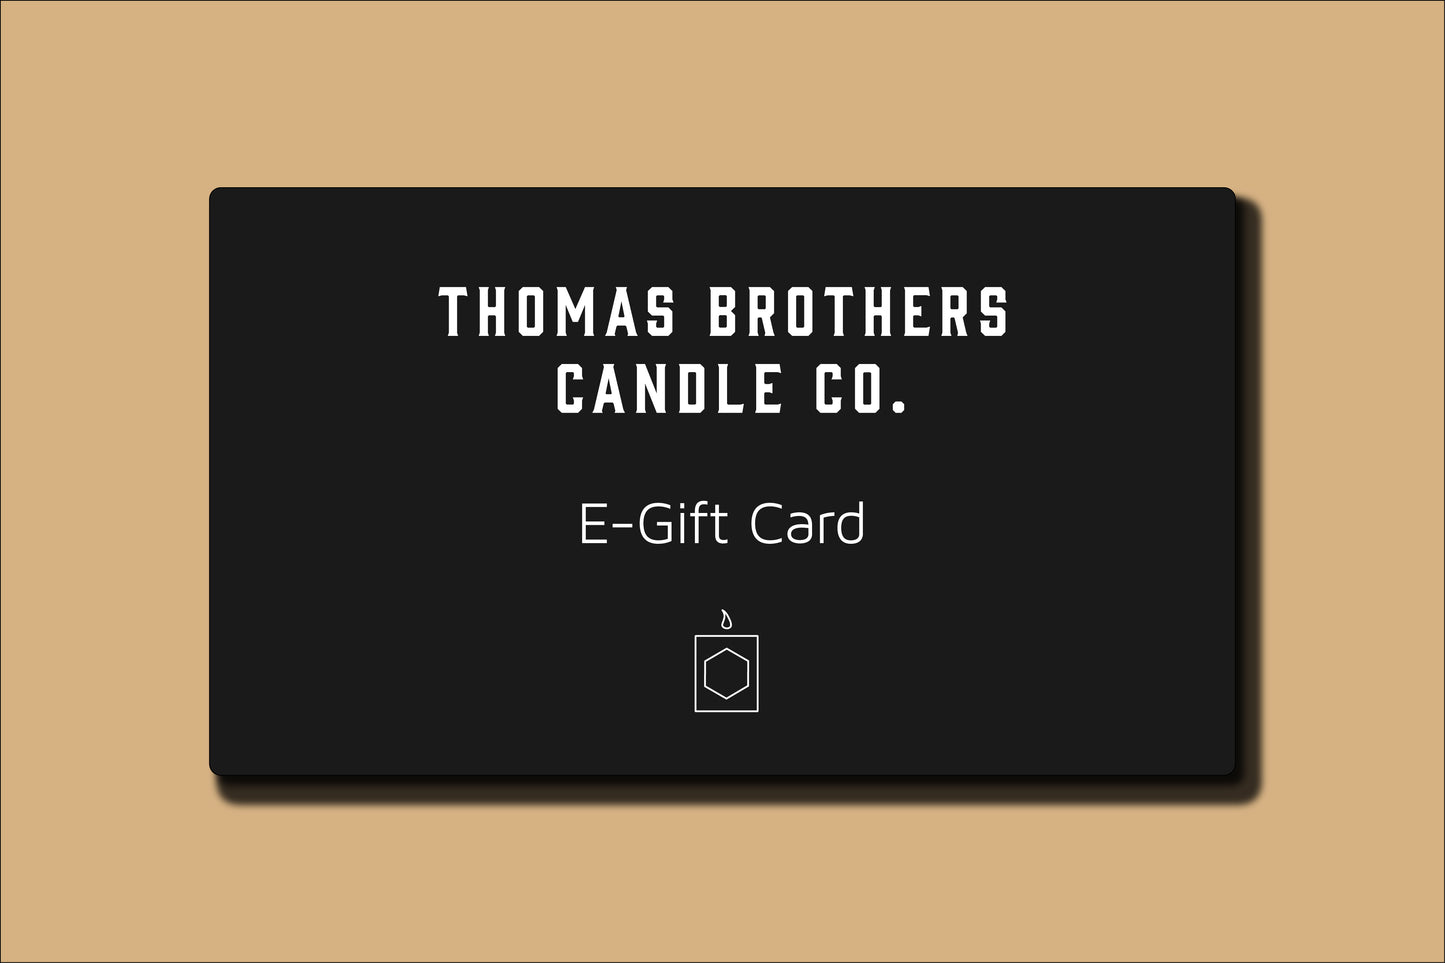 Thomas Brothers Candle Co. E-Gift Card